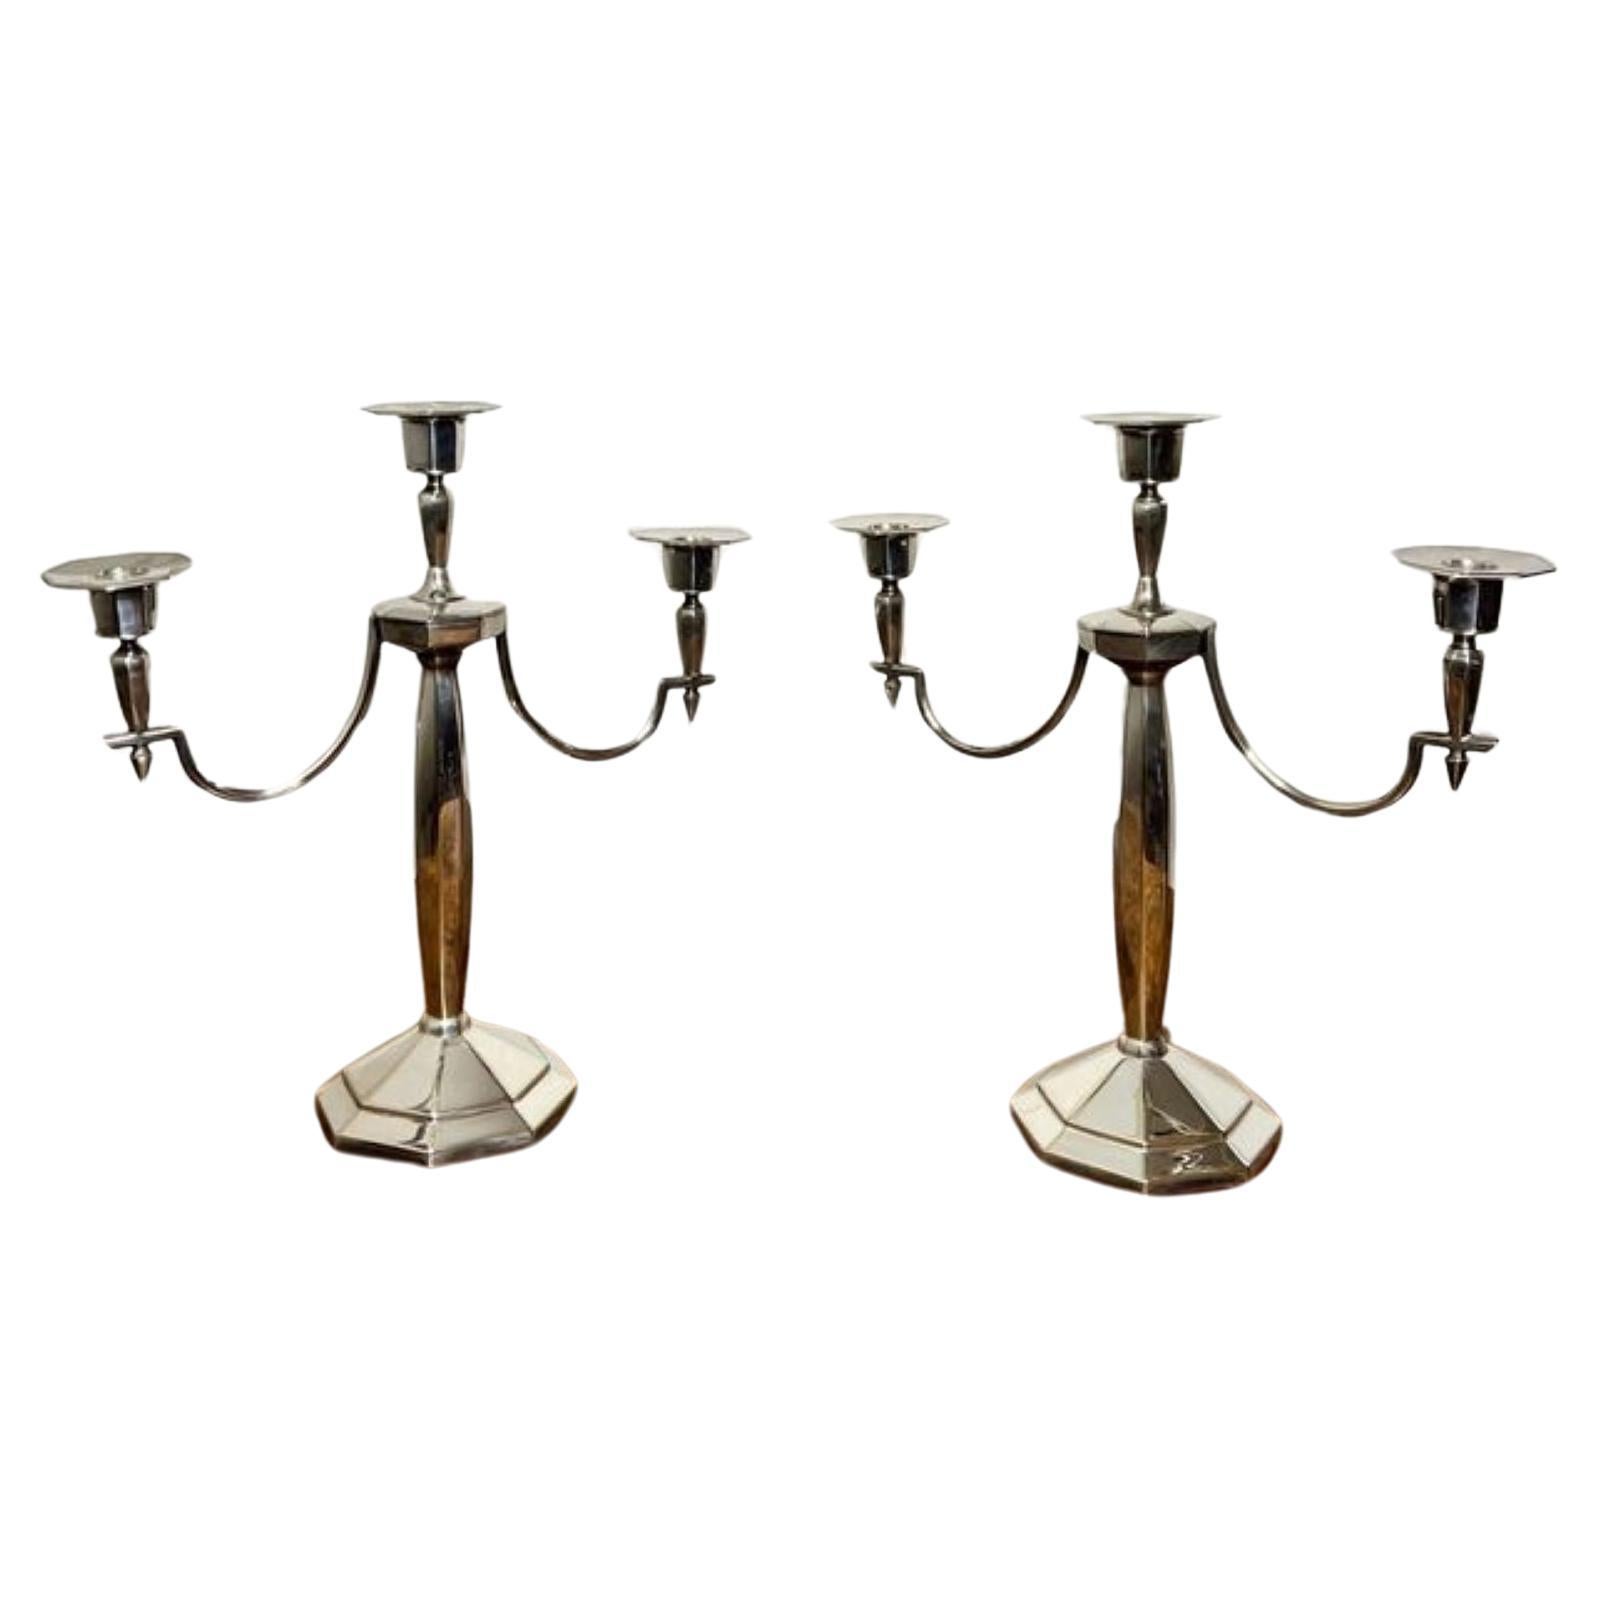 Outstanding quality pair of antique Edwardian silver plated candelabras  For Sale